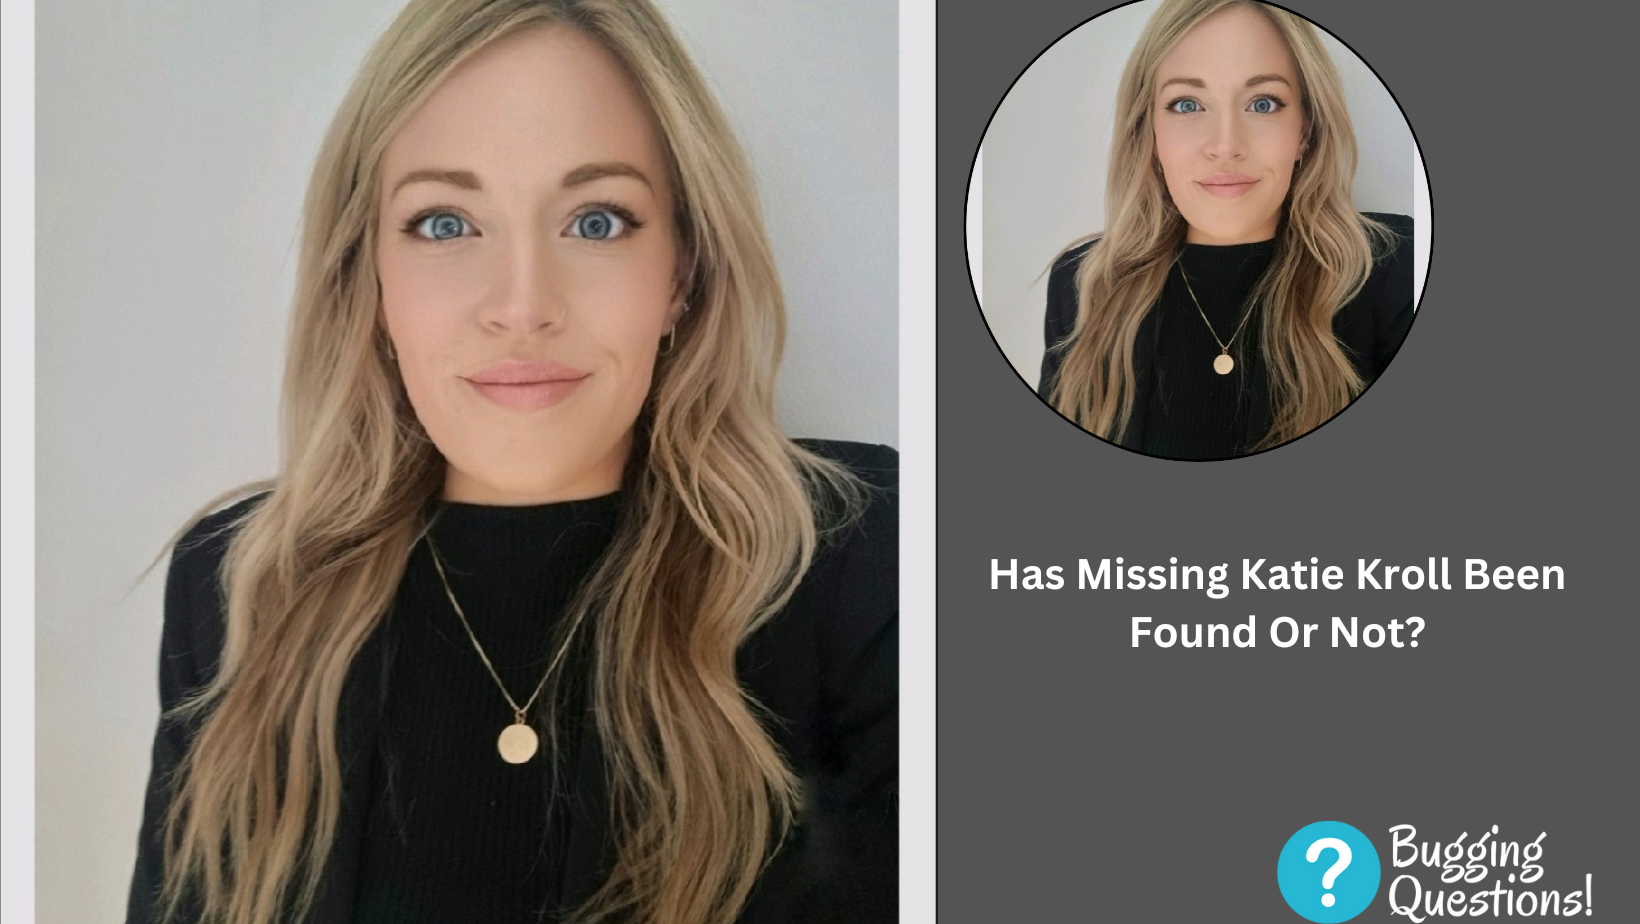 Has Missing Katie Kroll Been Found Or Not?